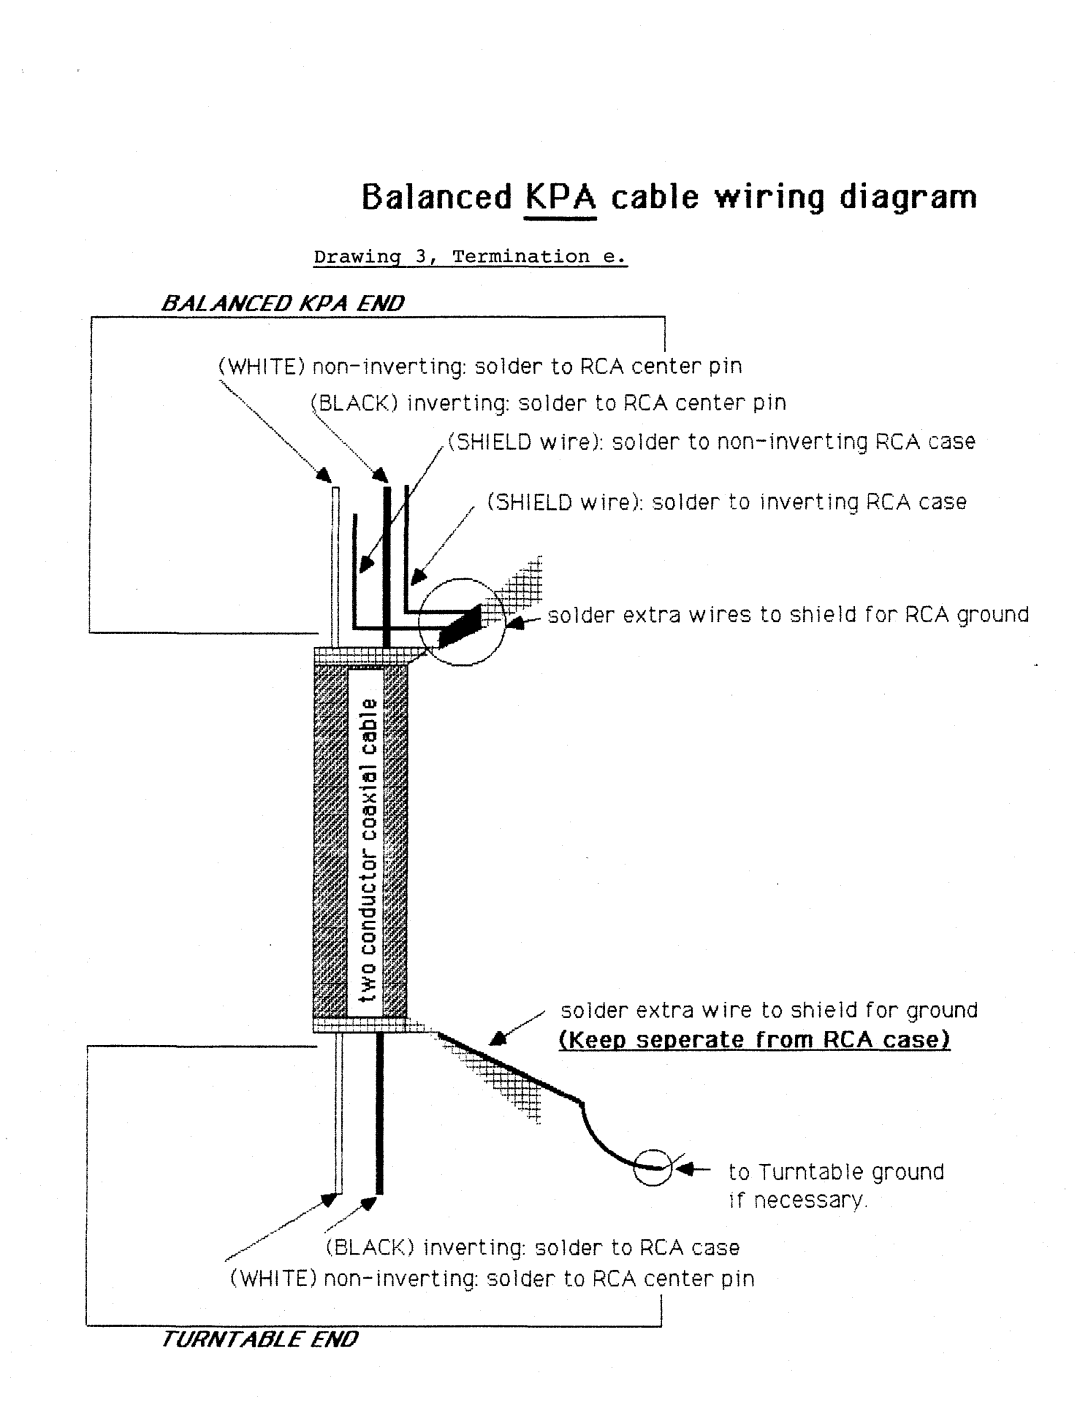 Krell Industries KBL Balanced KPAcable wiring diagram, Keep seperate from RCA case, B~I L A Ncedkpaend, Turntable End 